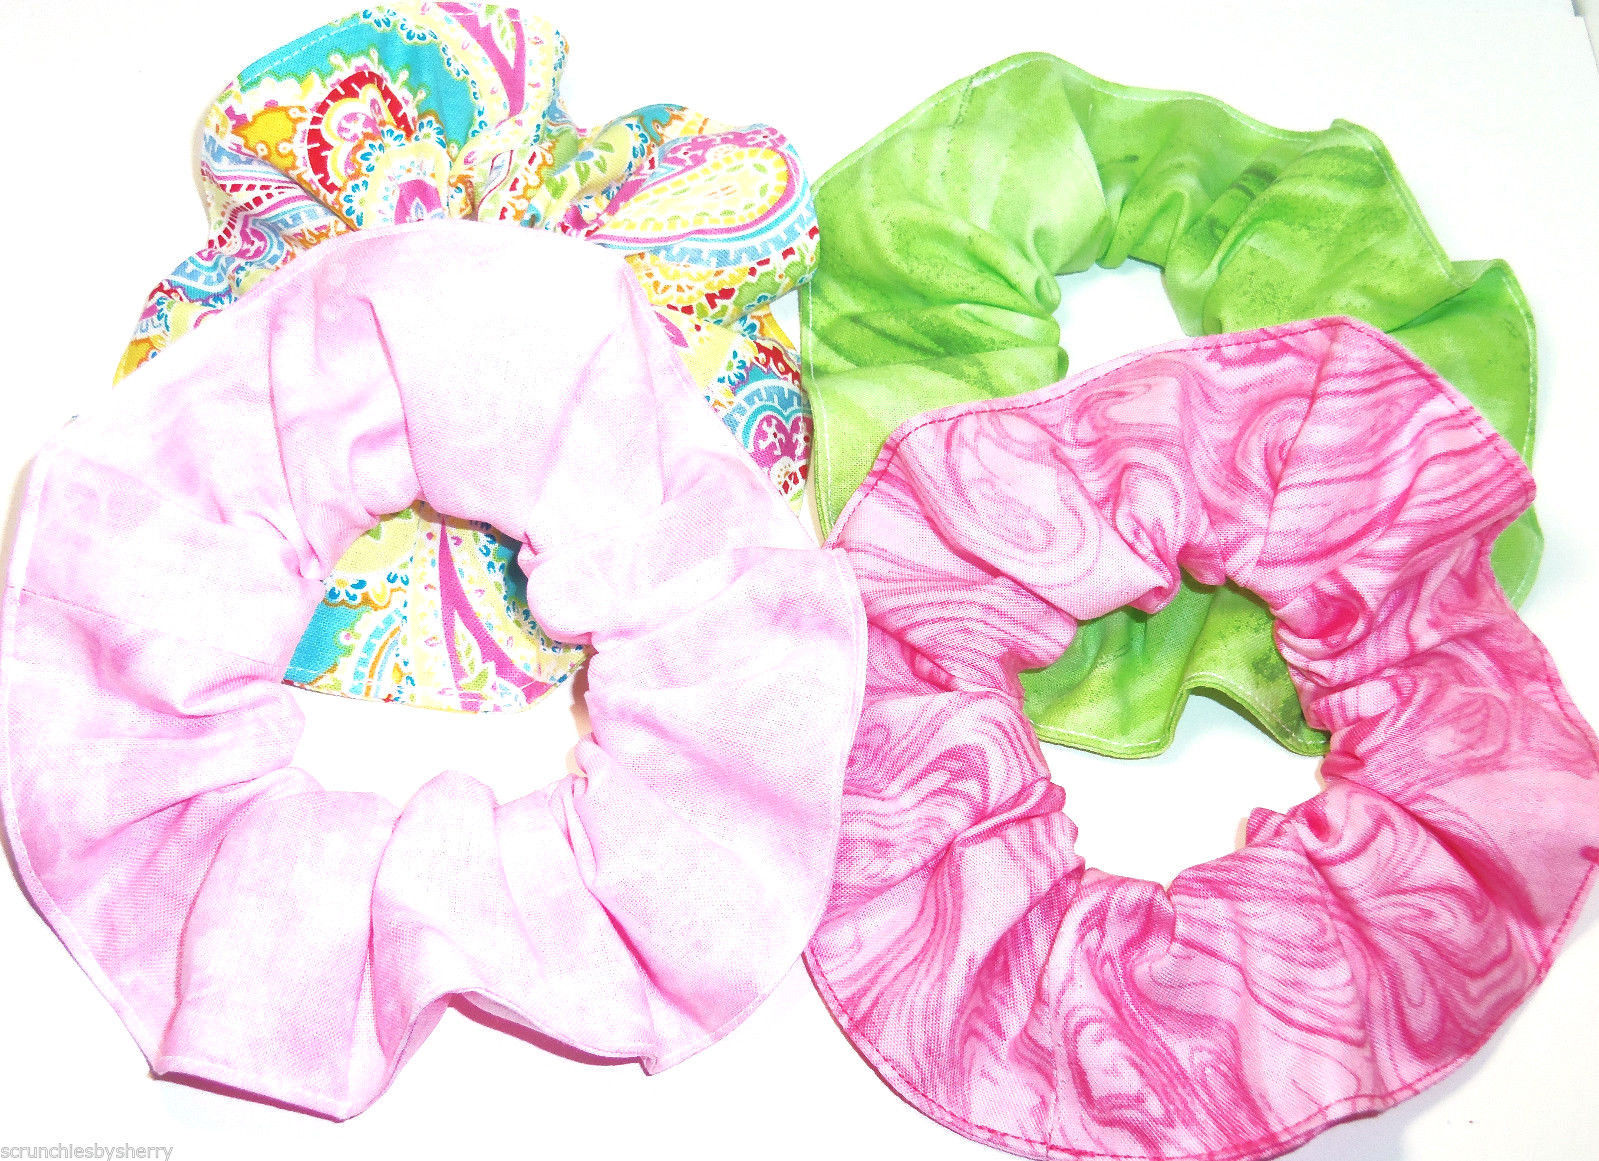 Paisley Pink Lime Green Hair Scrunchies by Sherry Ponytail Holder Lot of 4 - $24.95